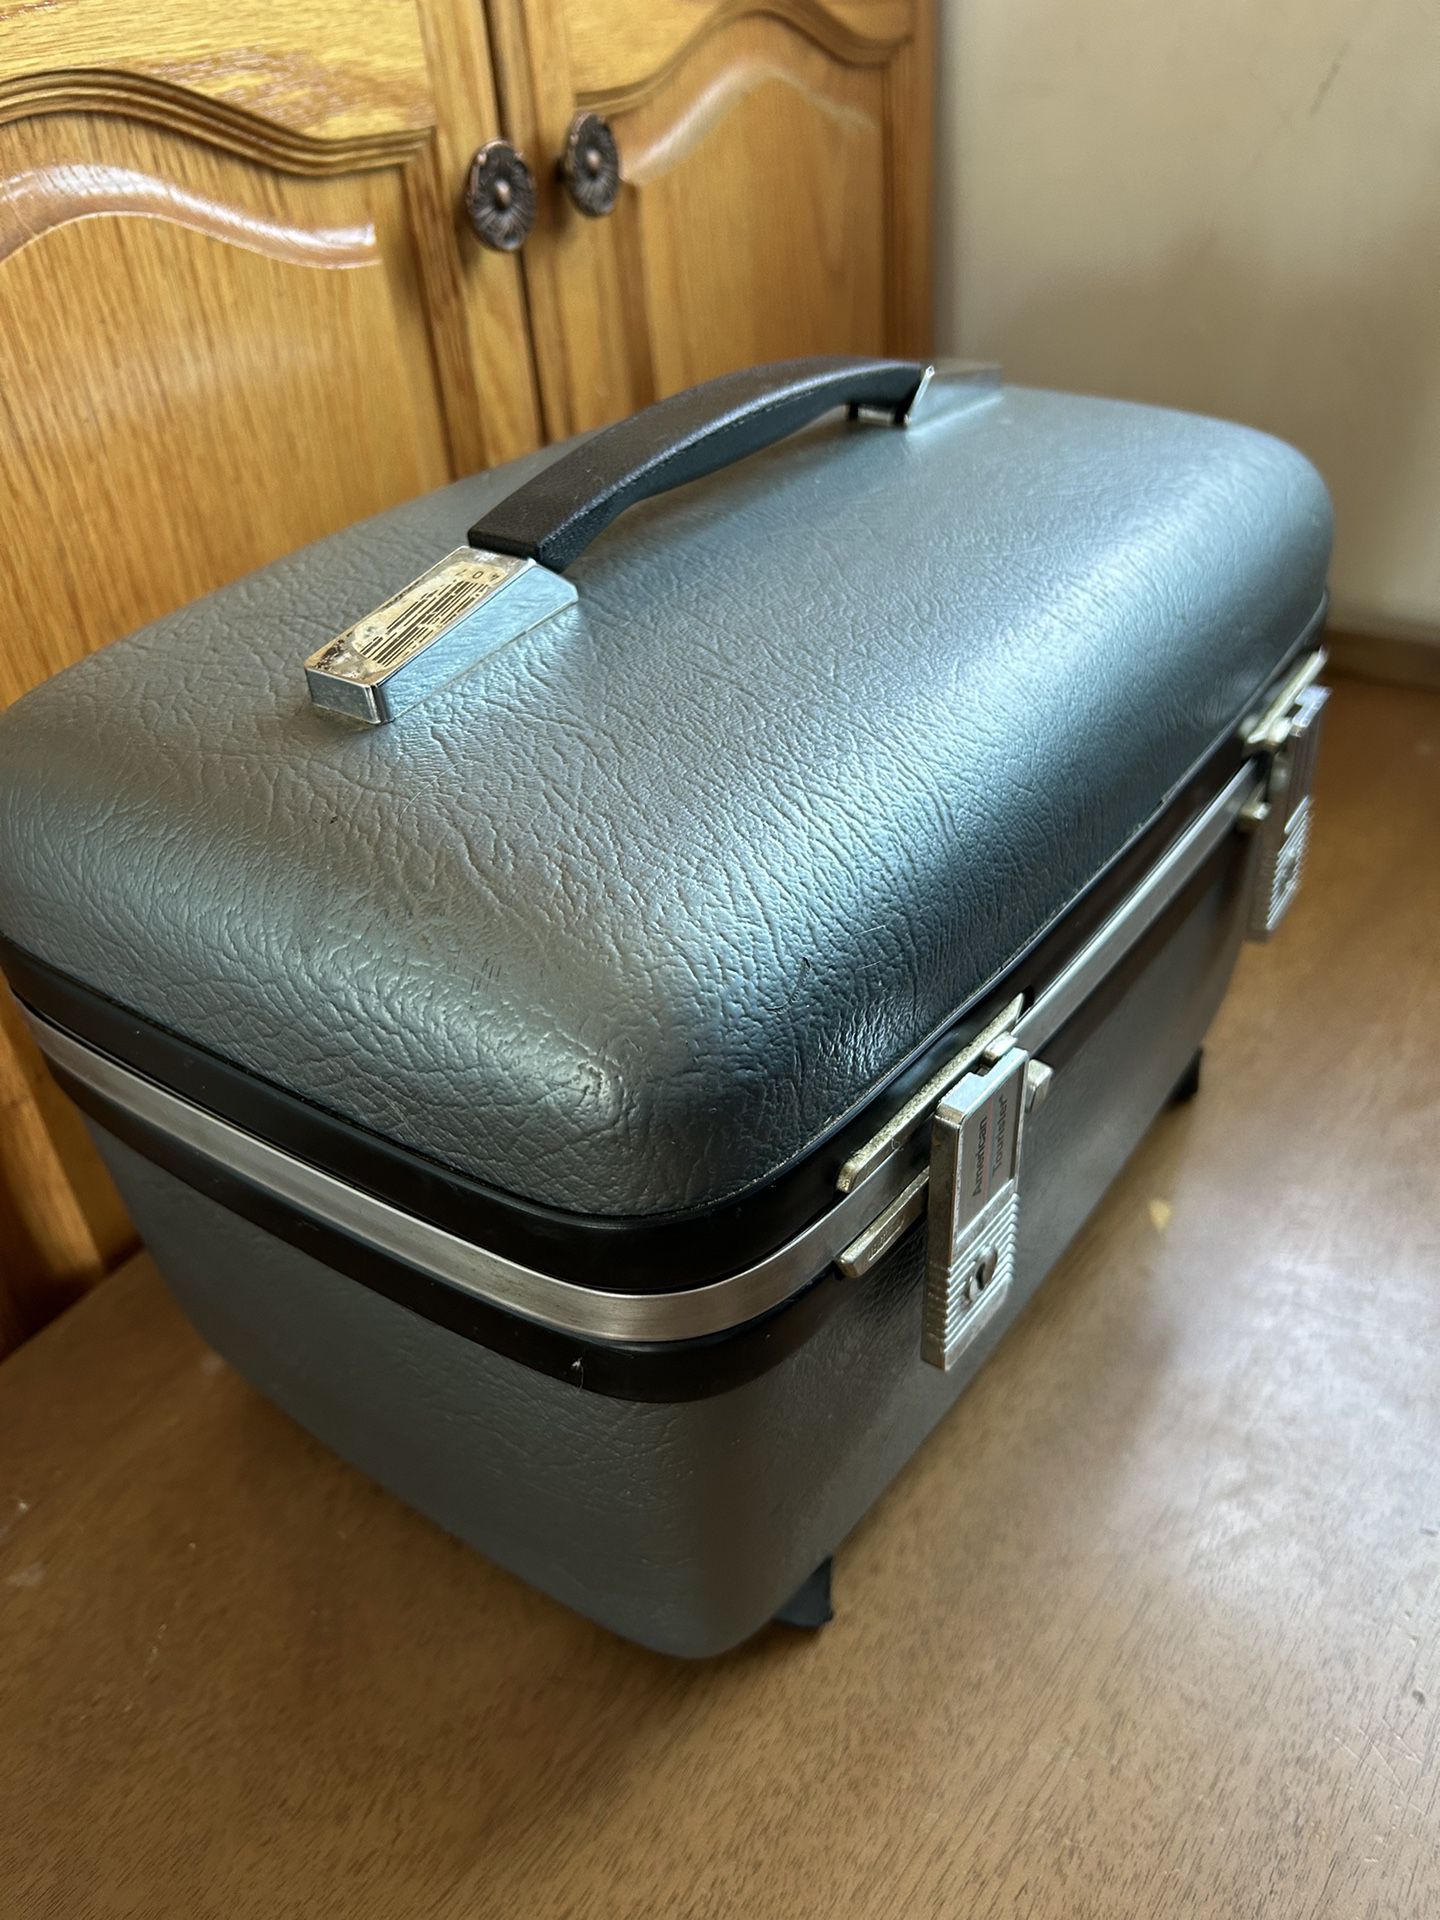 Vintage Blue/gray American Tourister 